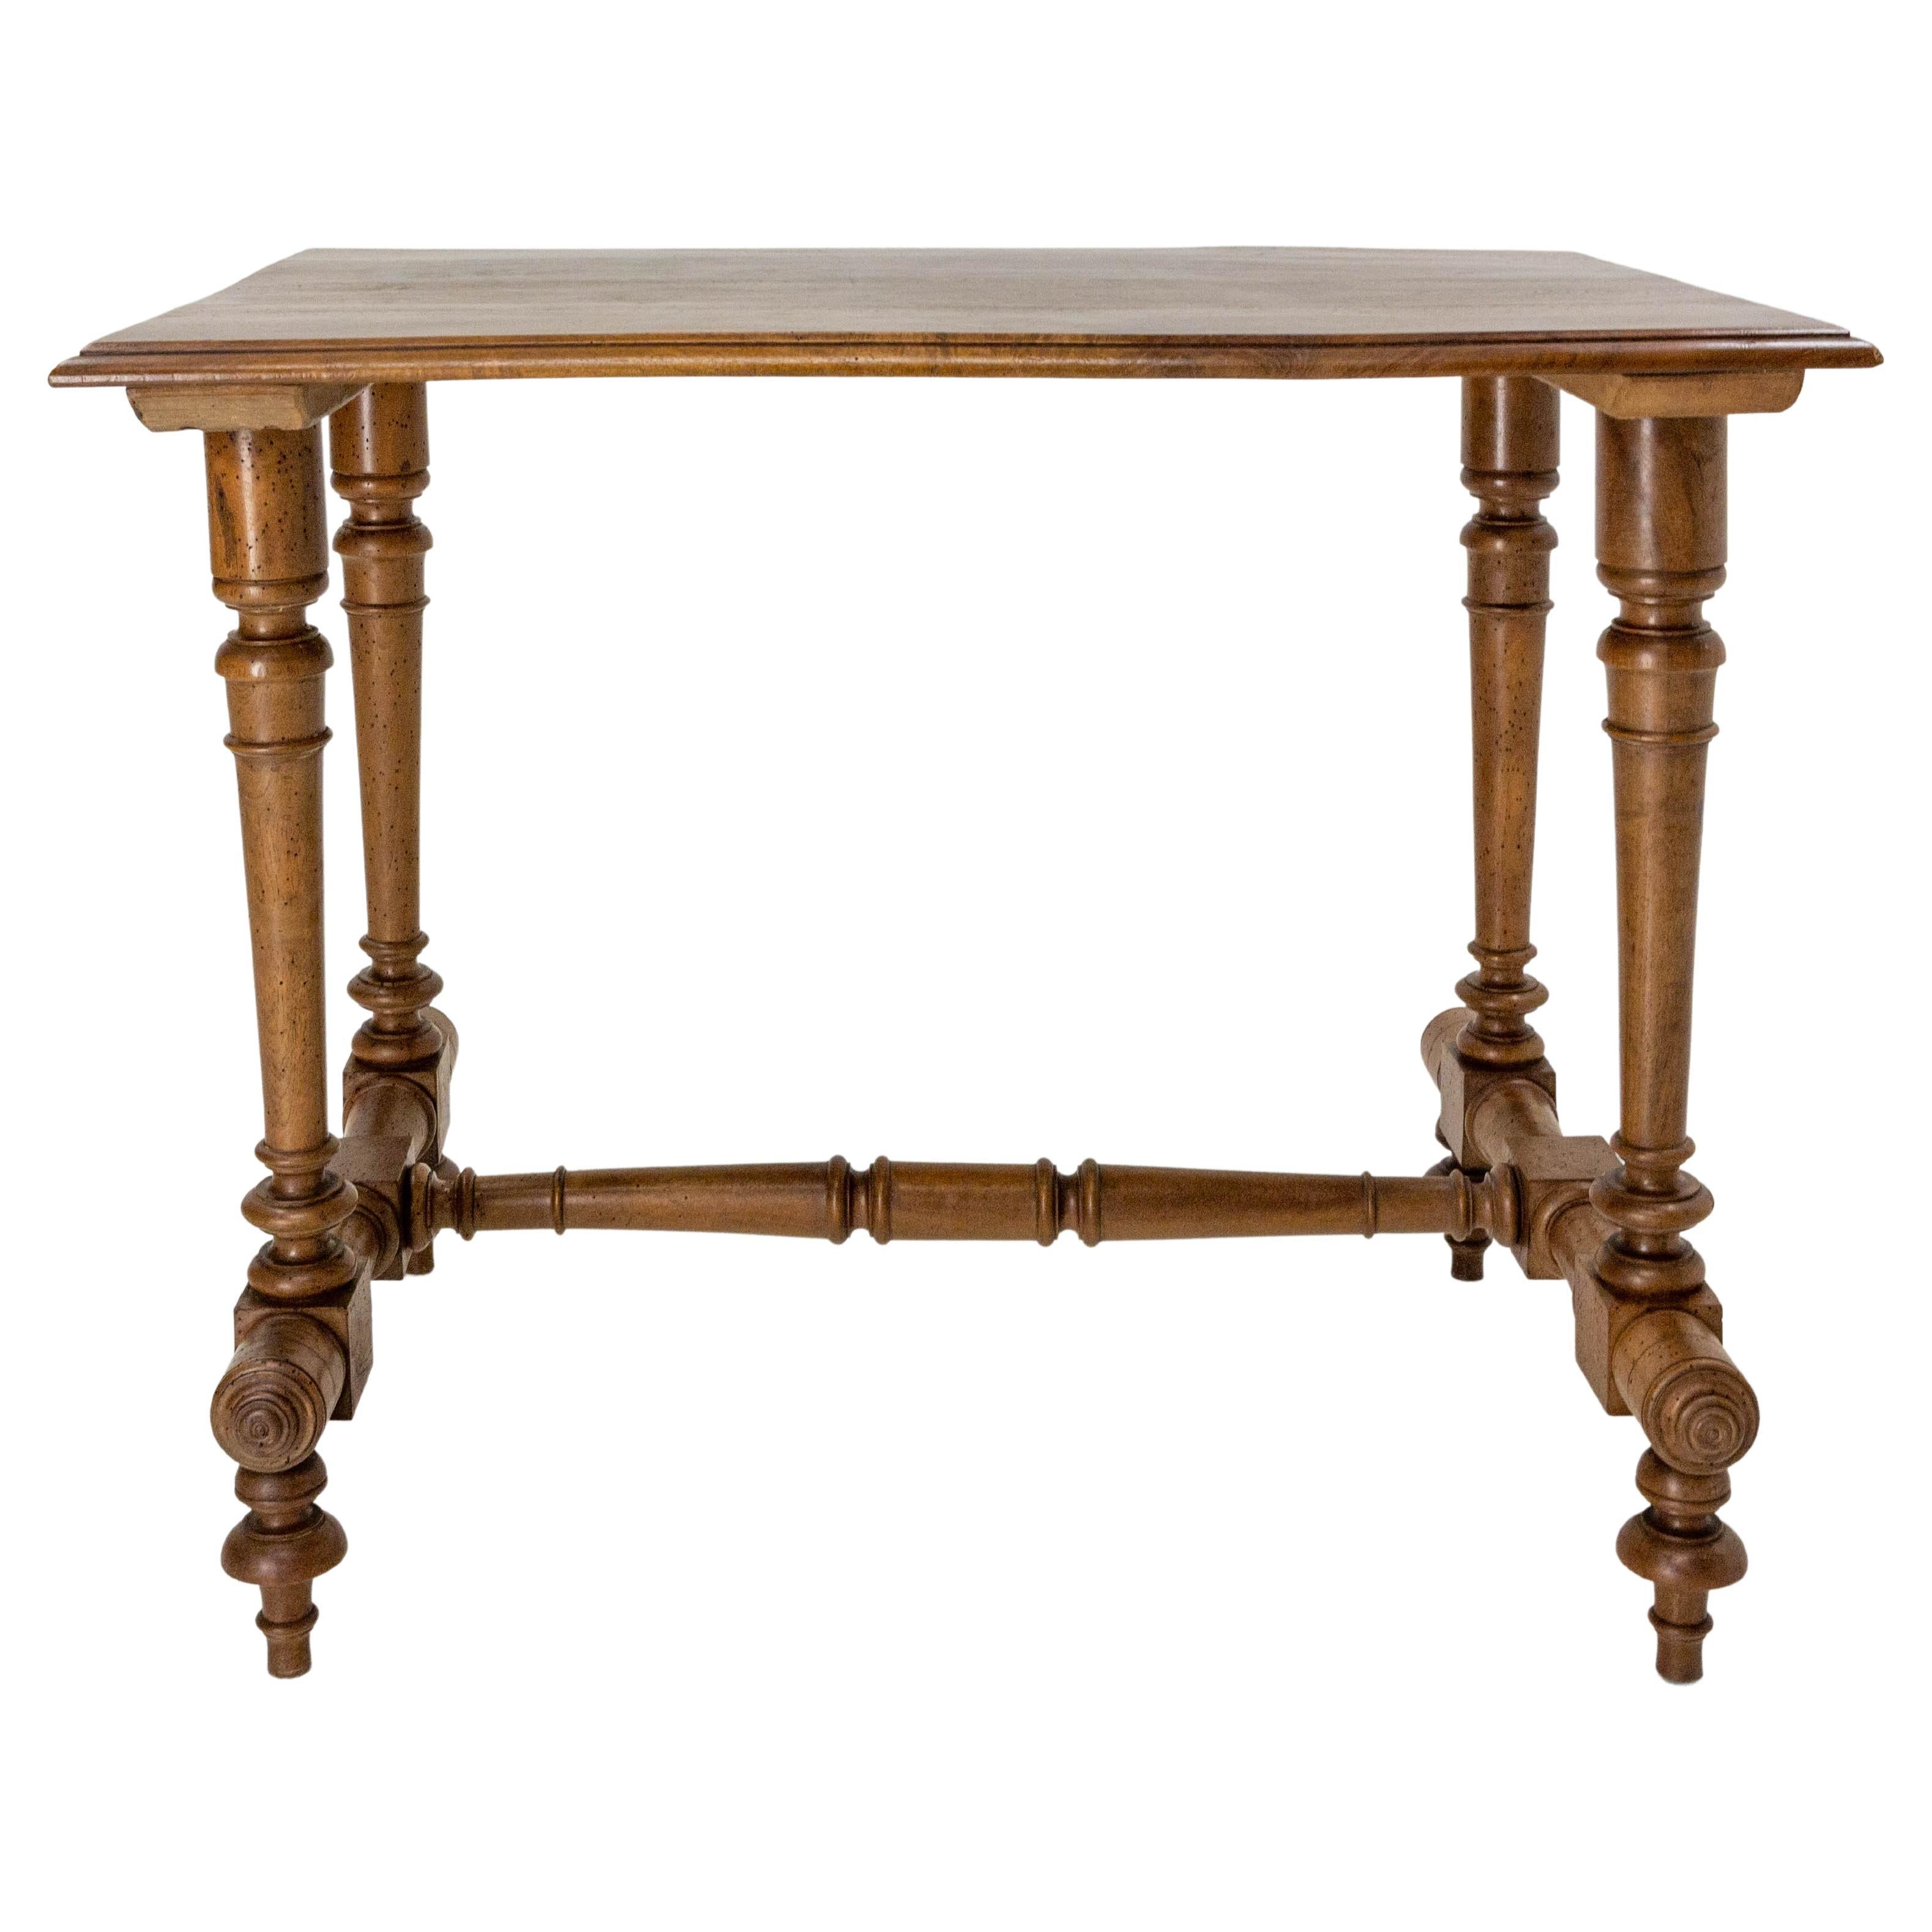 French Walnut Side Table or End Table Turned Legs, circa 1900